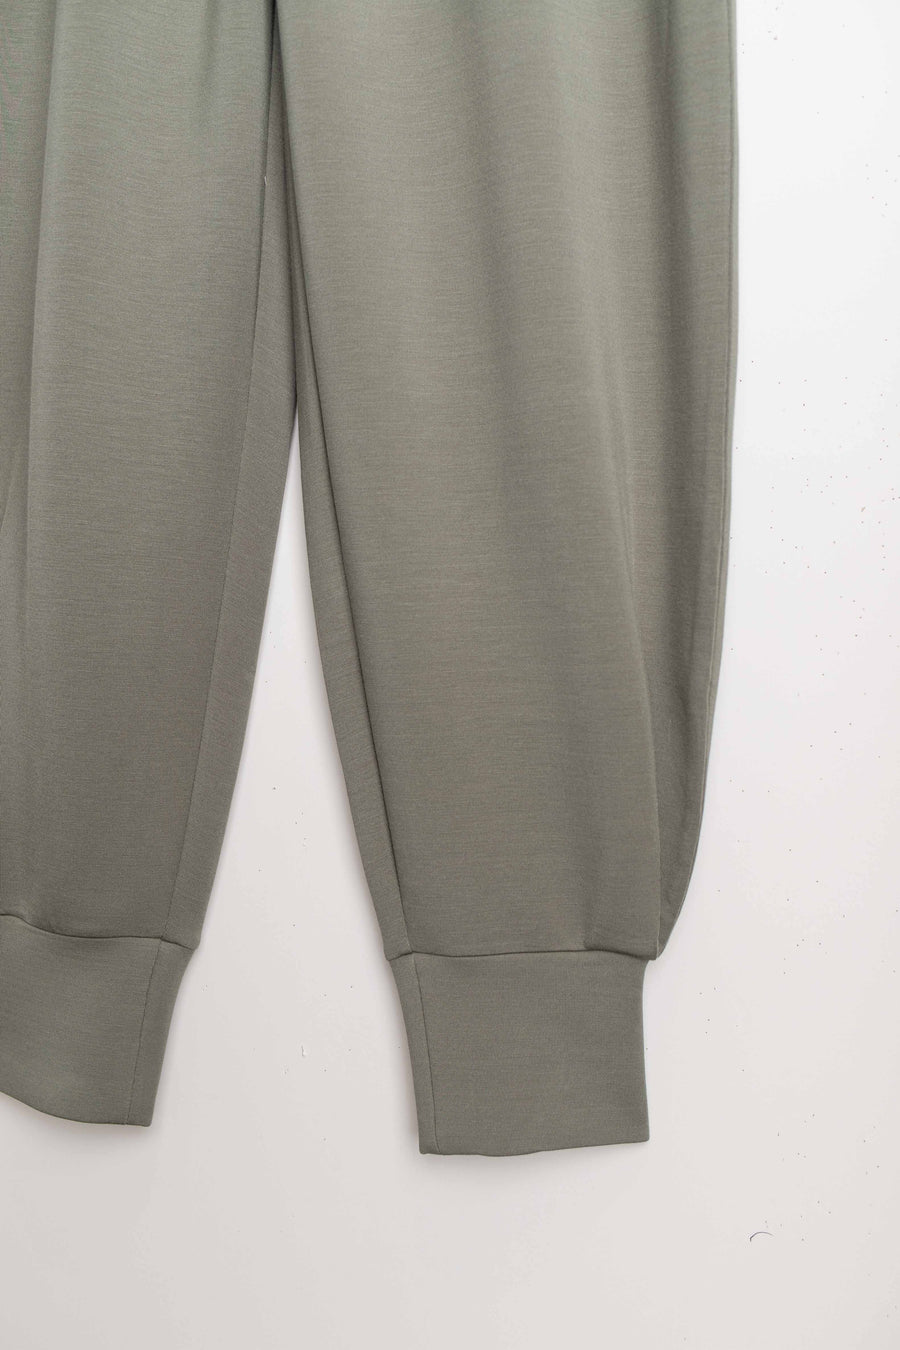 Varley the relaxed pant 27.5 in shadow